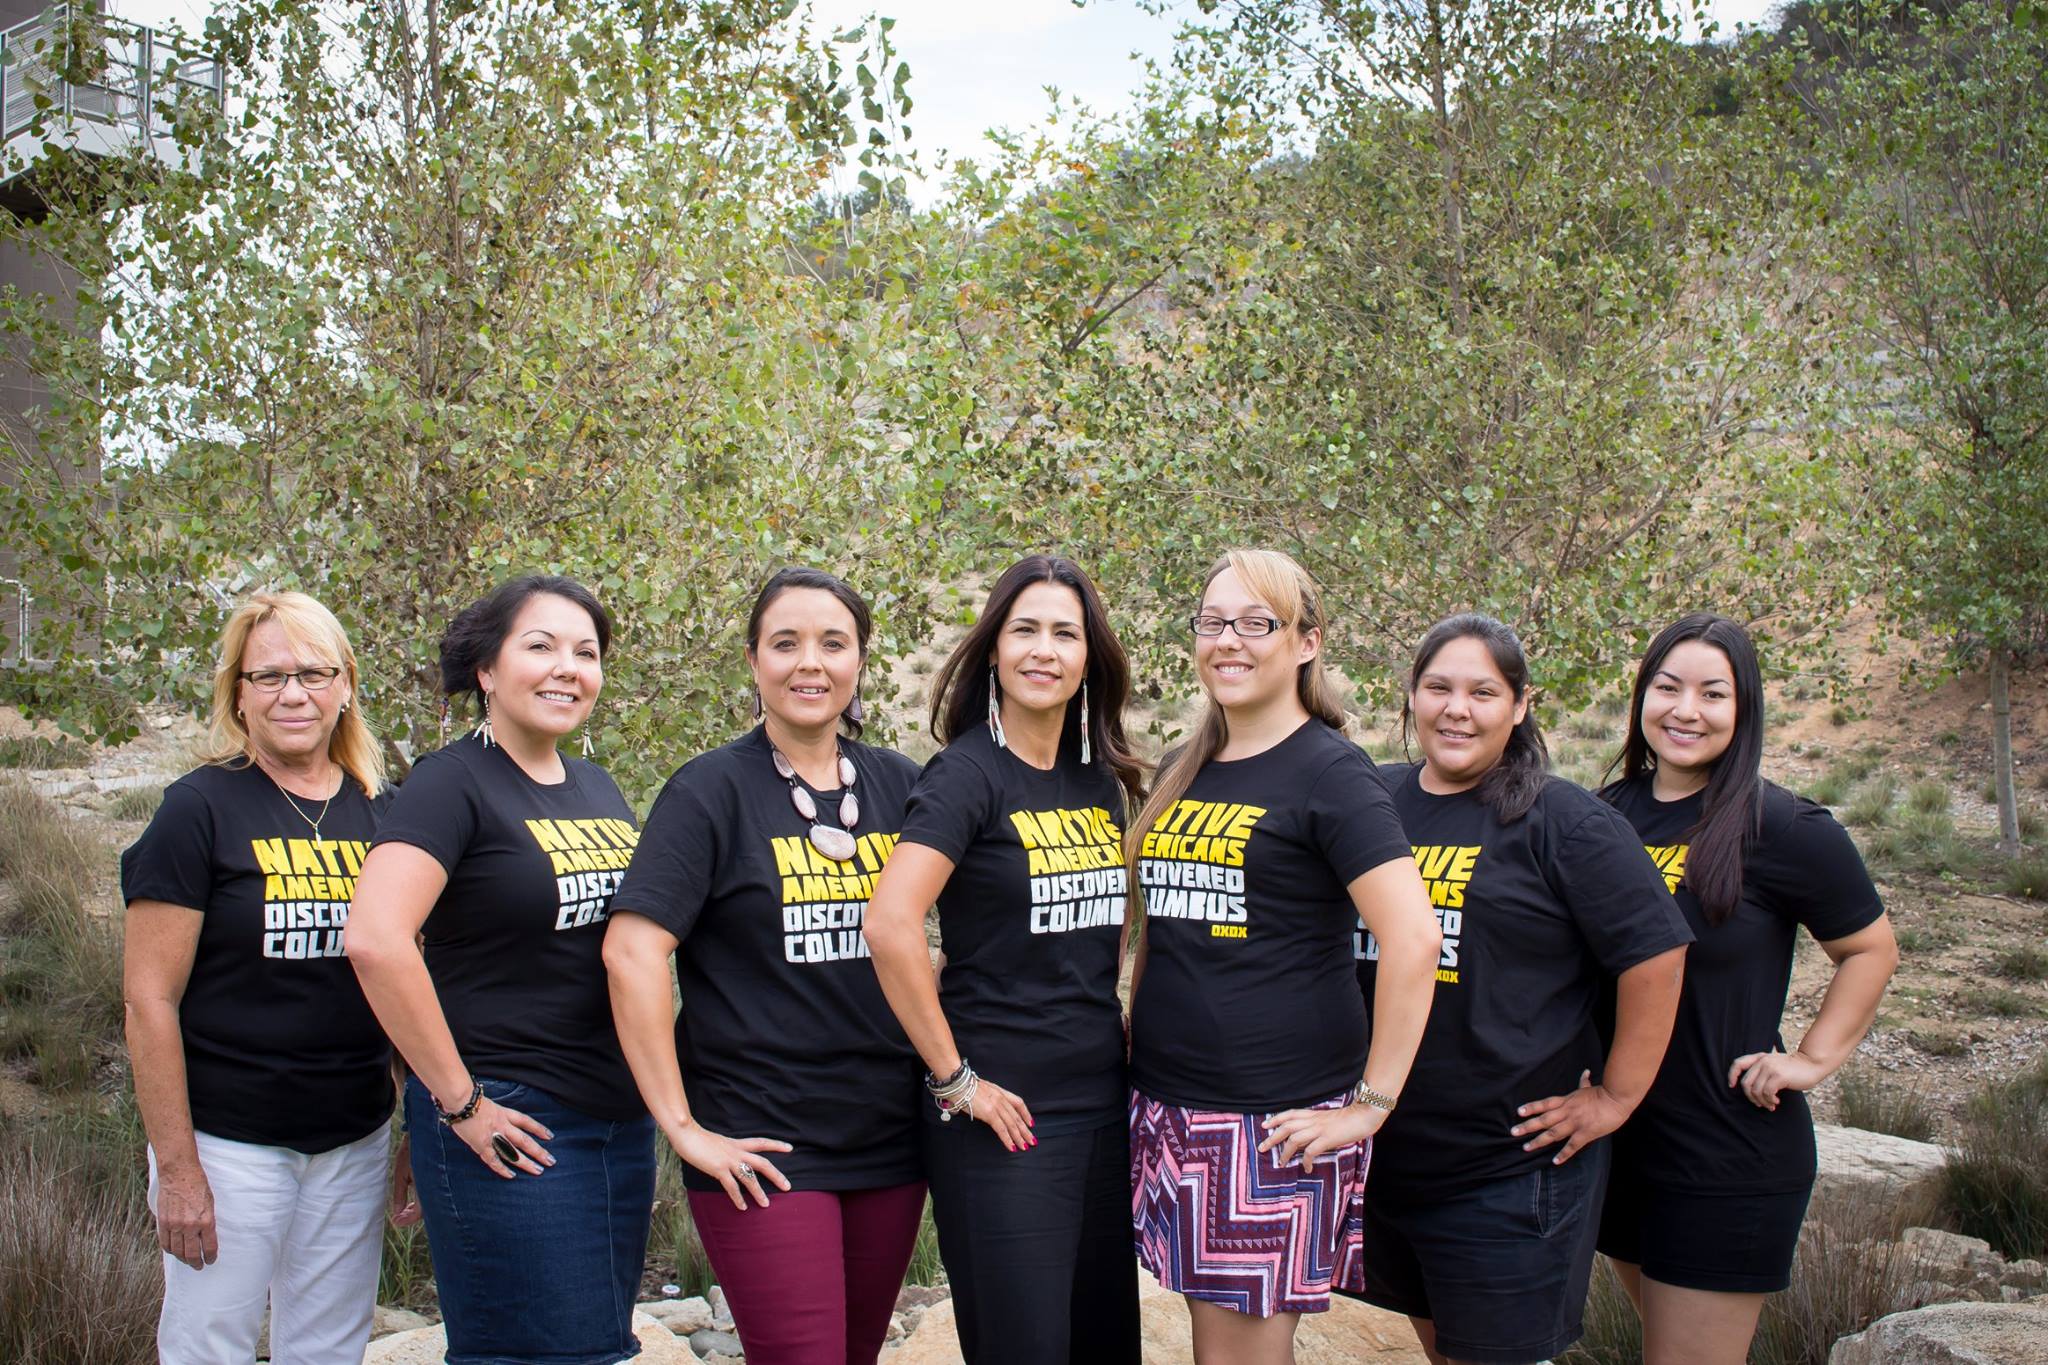 CICSC students and faculty standing together outside wearing black "Native Americans Discovered Columbus" shirts with the words "Native Americans" in yellow and the words "Discovered Columbus" in white